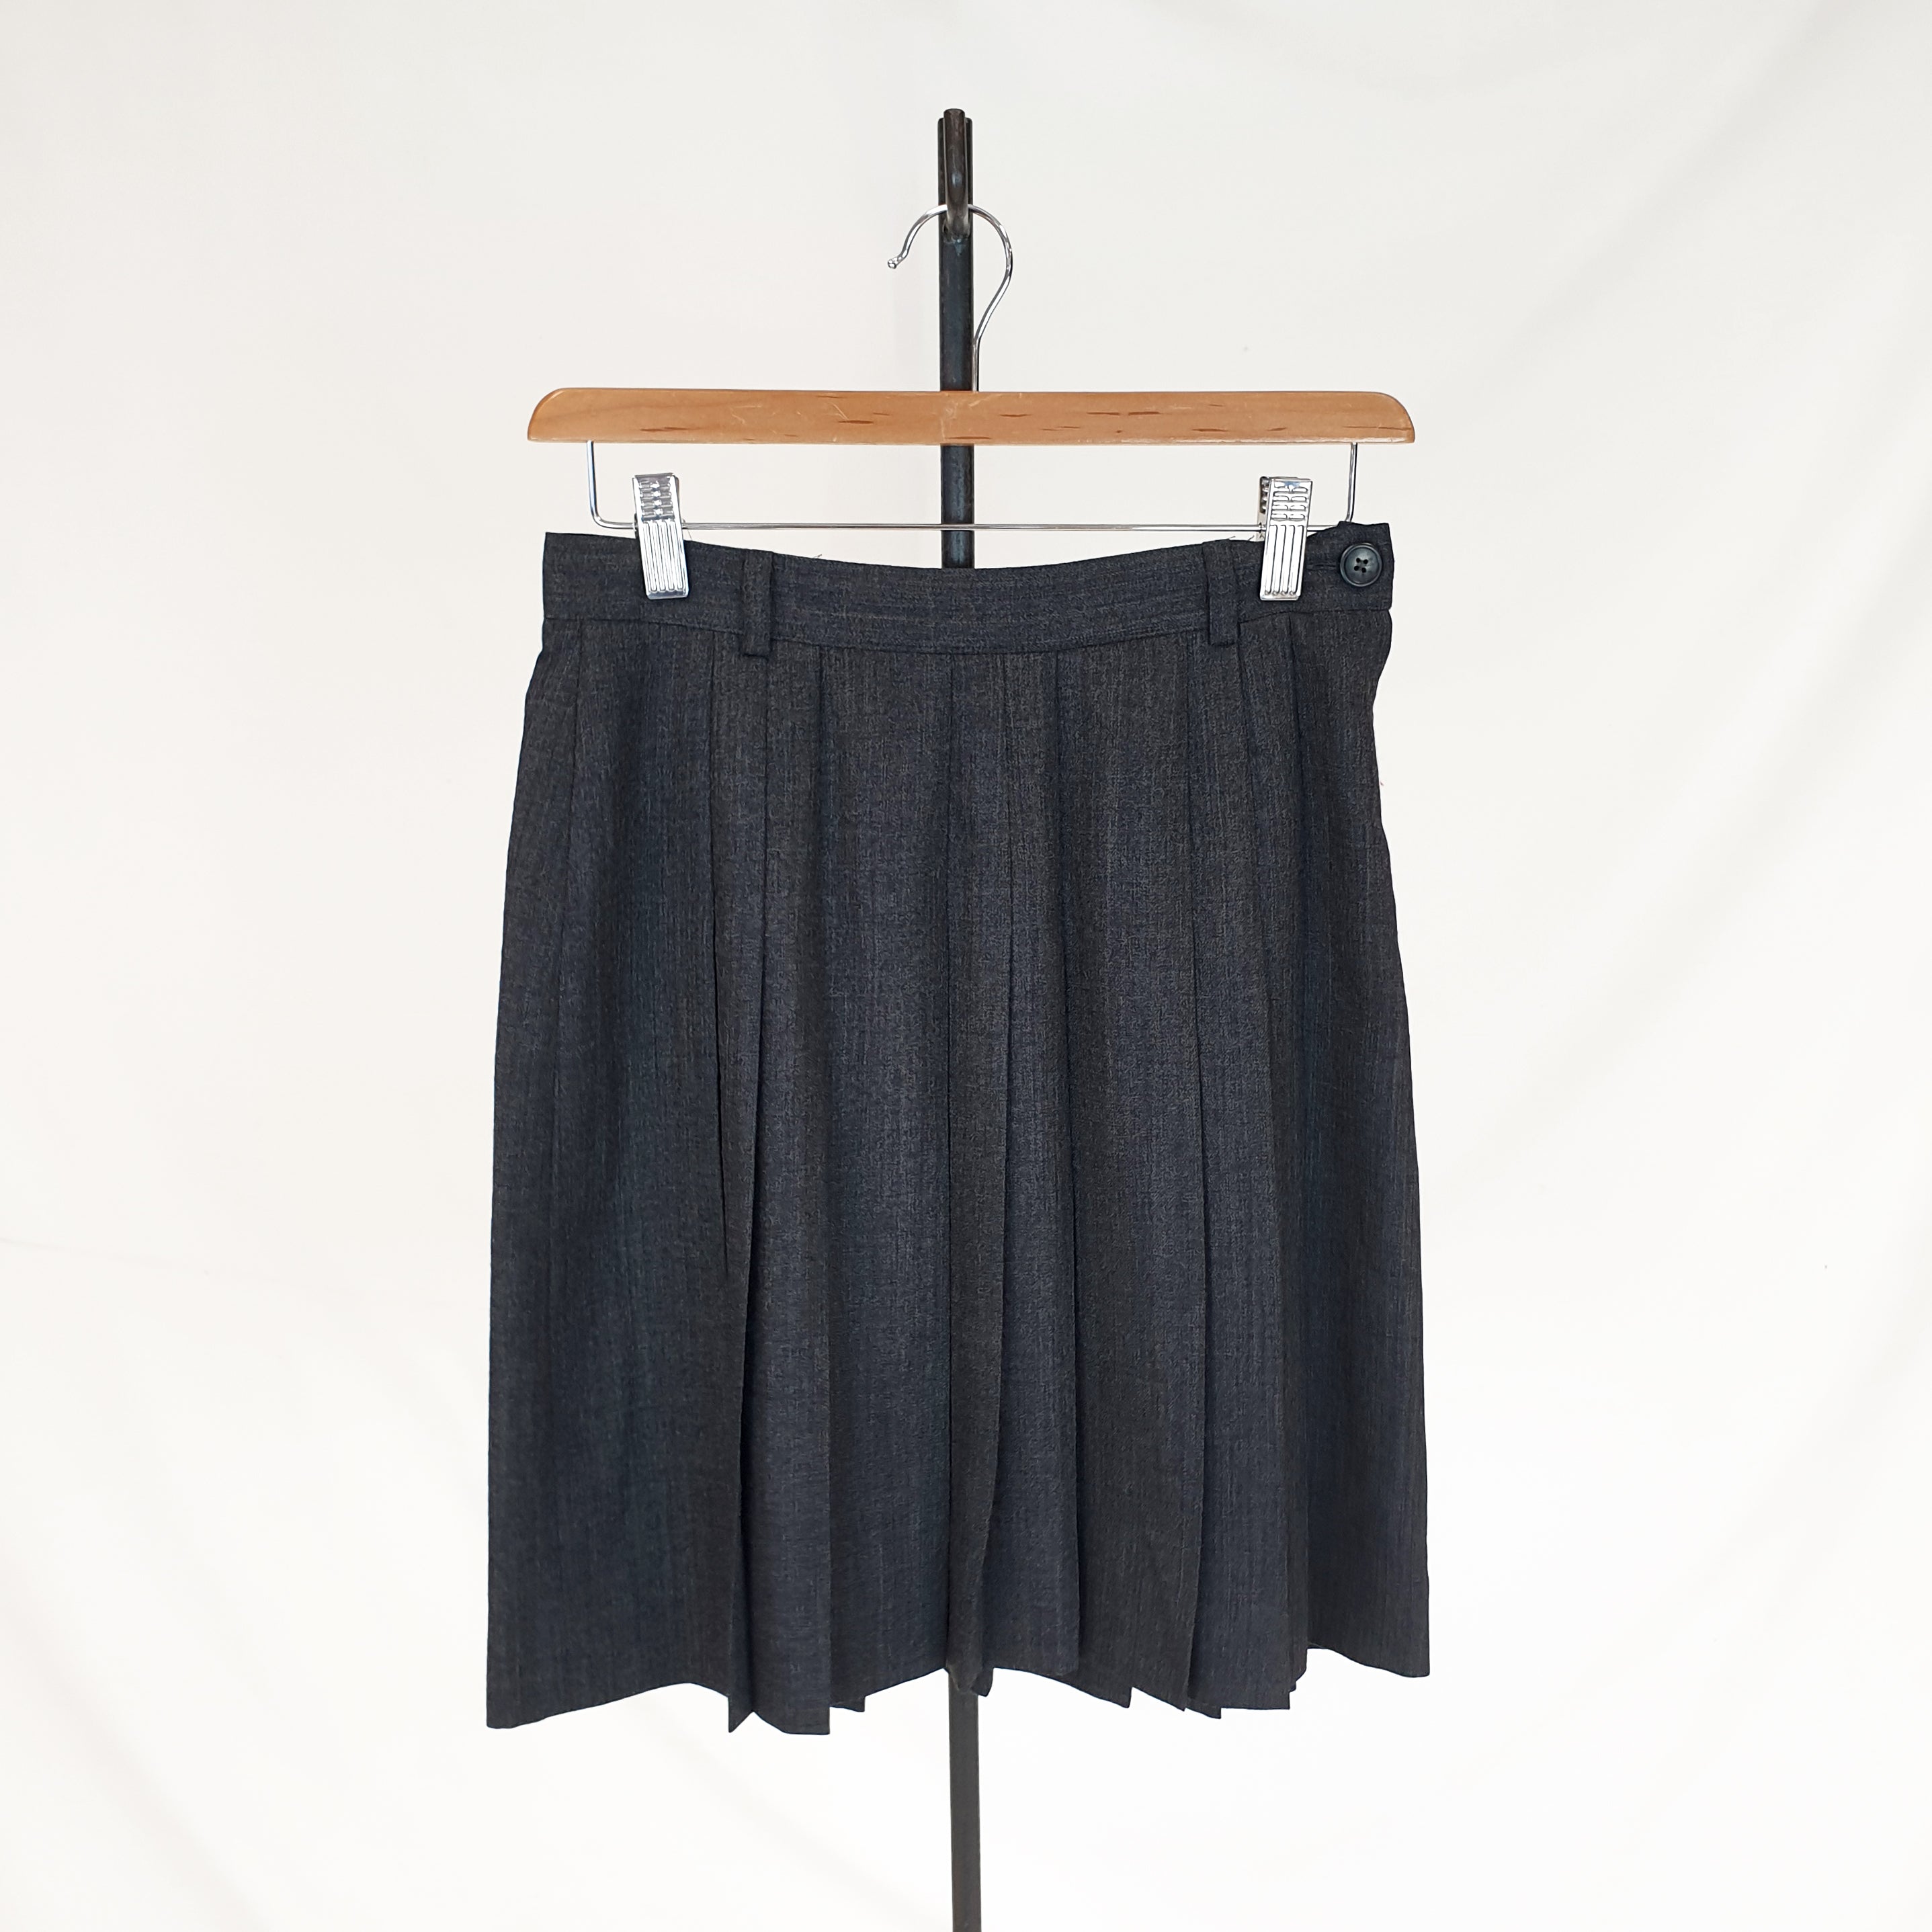 Max & Co Pleated Wool Skirt